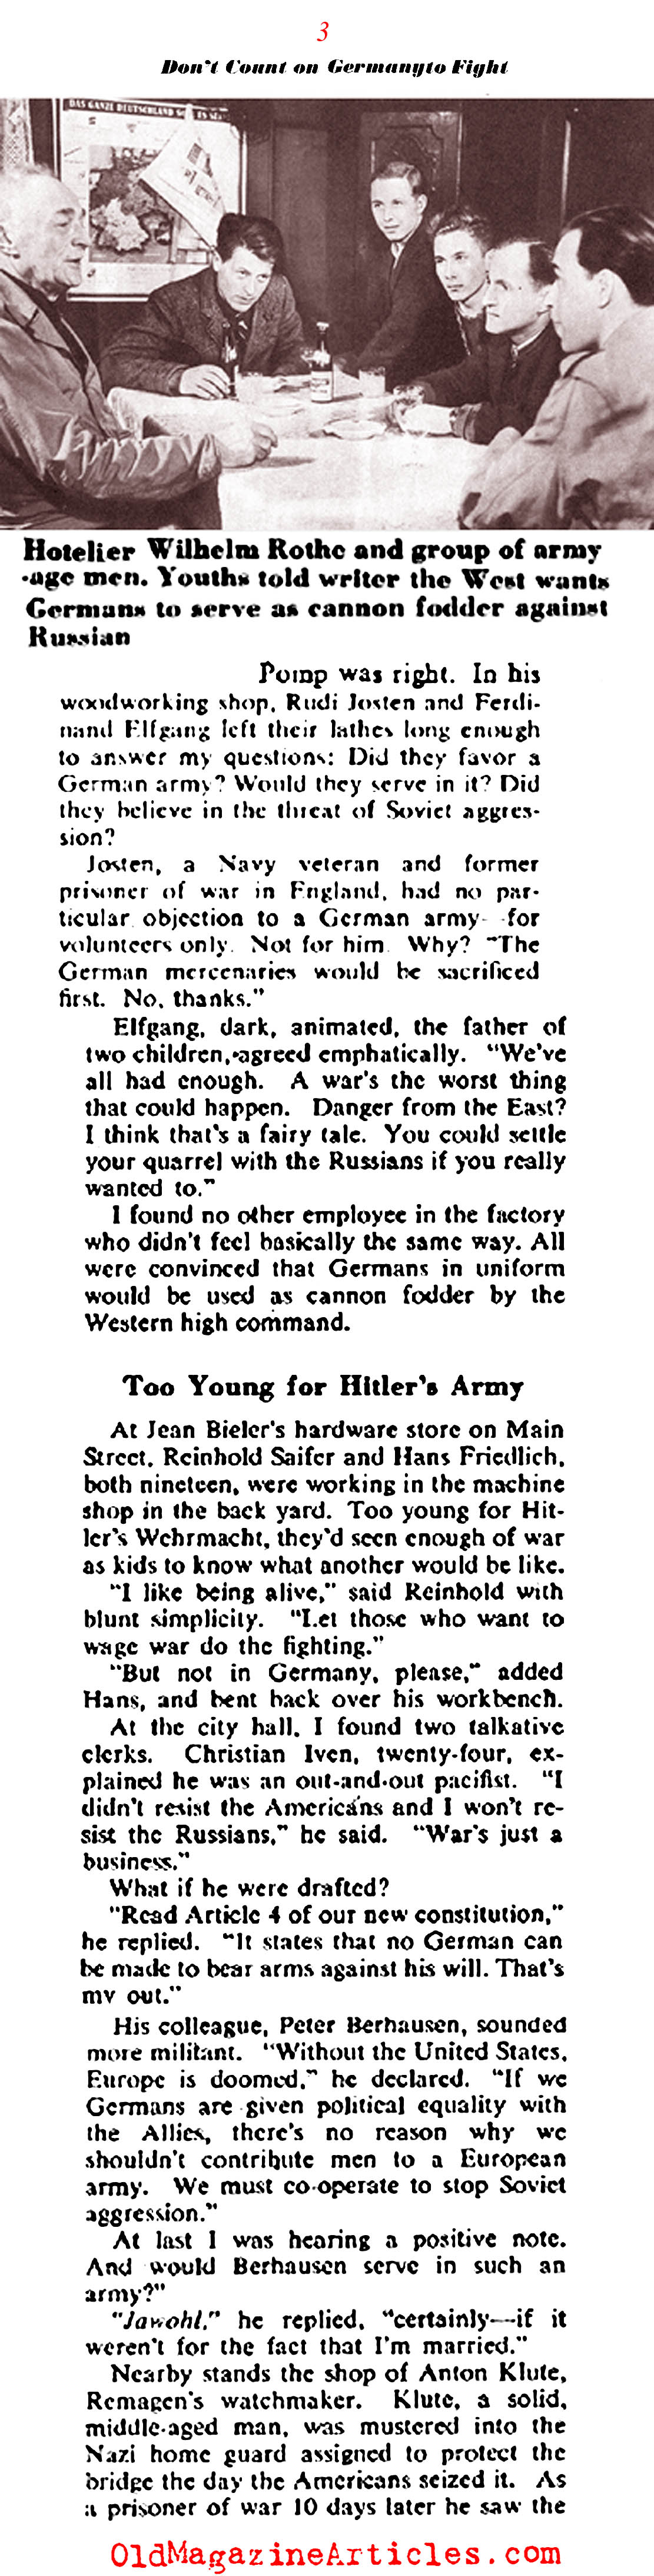 Germany and the Next War (Collier's Magazine, 1951)